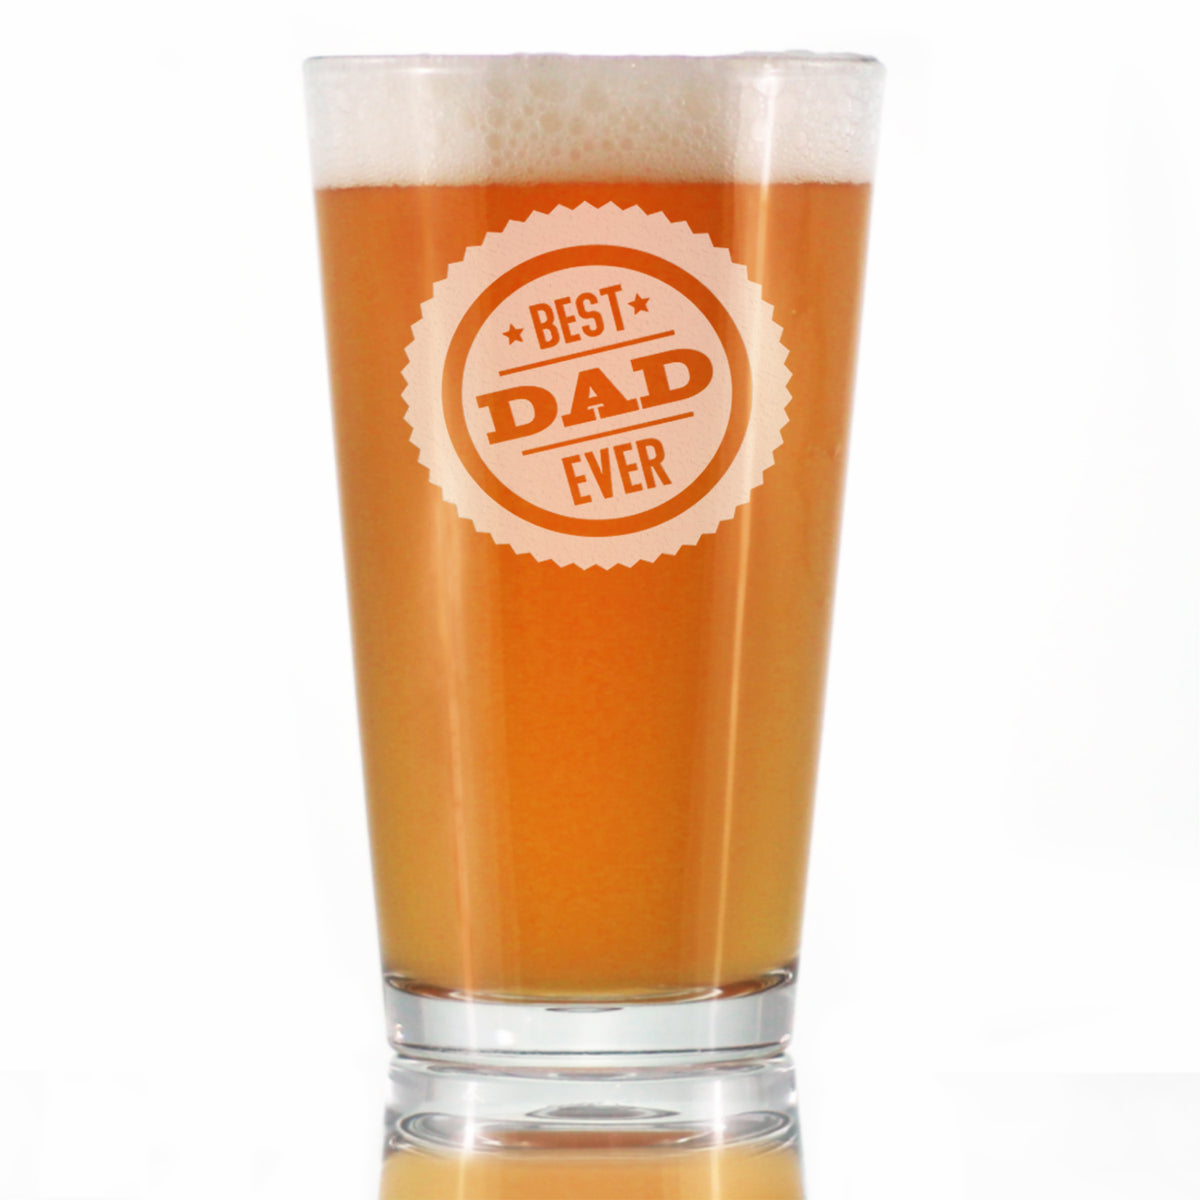 Best Dad Ever 16 oz Pint Glass, Fathers Day Gifts for Men, Husband &amp; Happy Birthday Beer Mug Gift for Dad